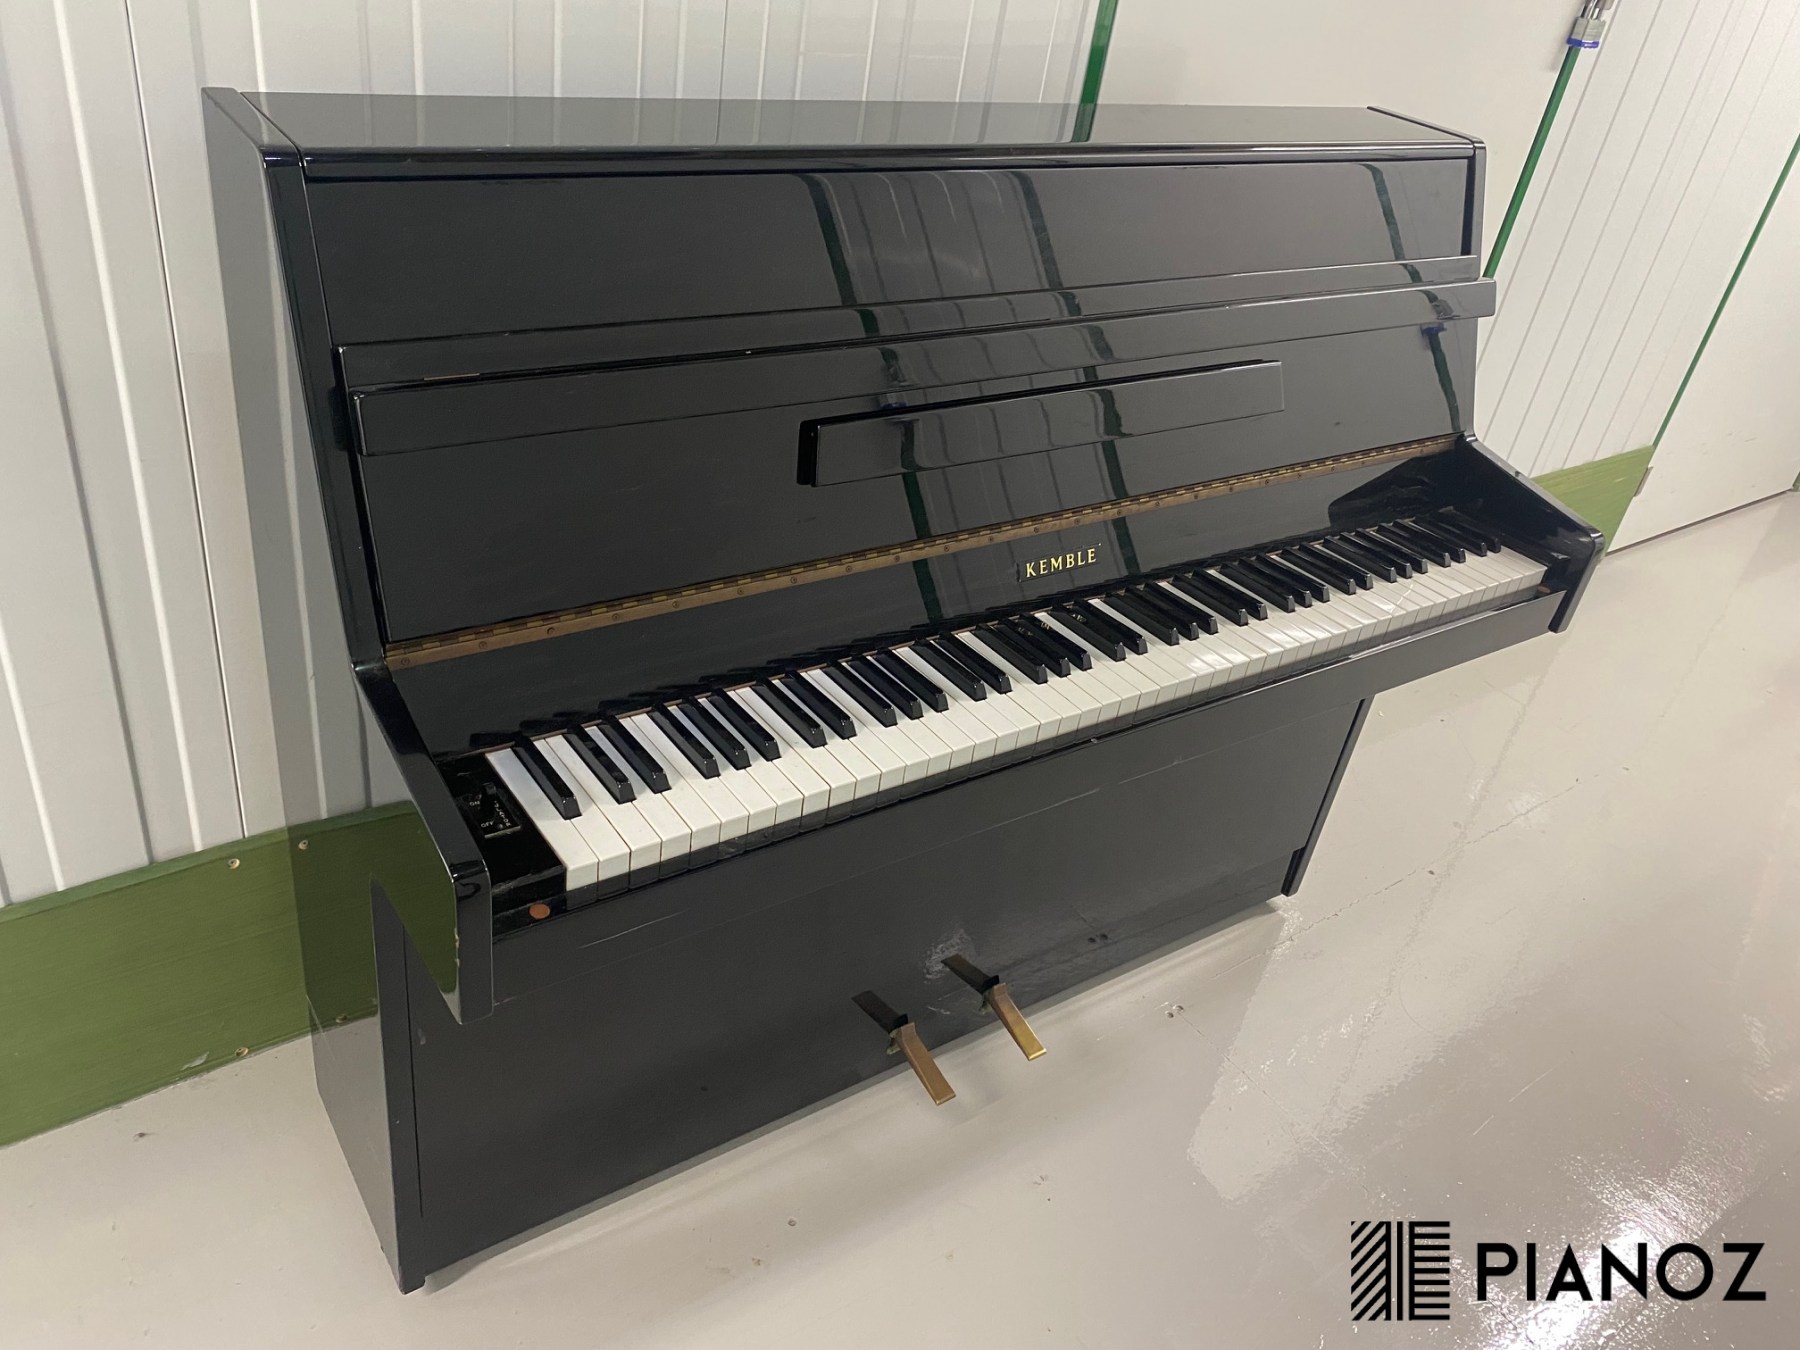 Kemble Compact High Gloss Upright Piano piano for sale in UK